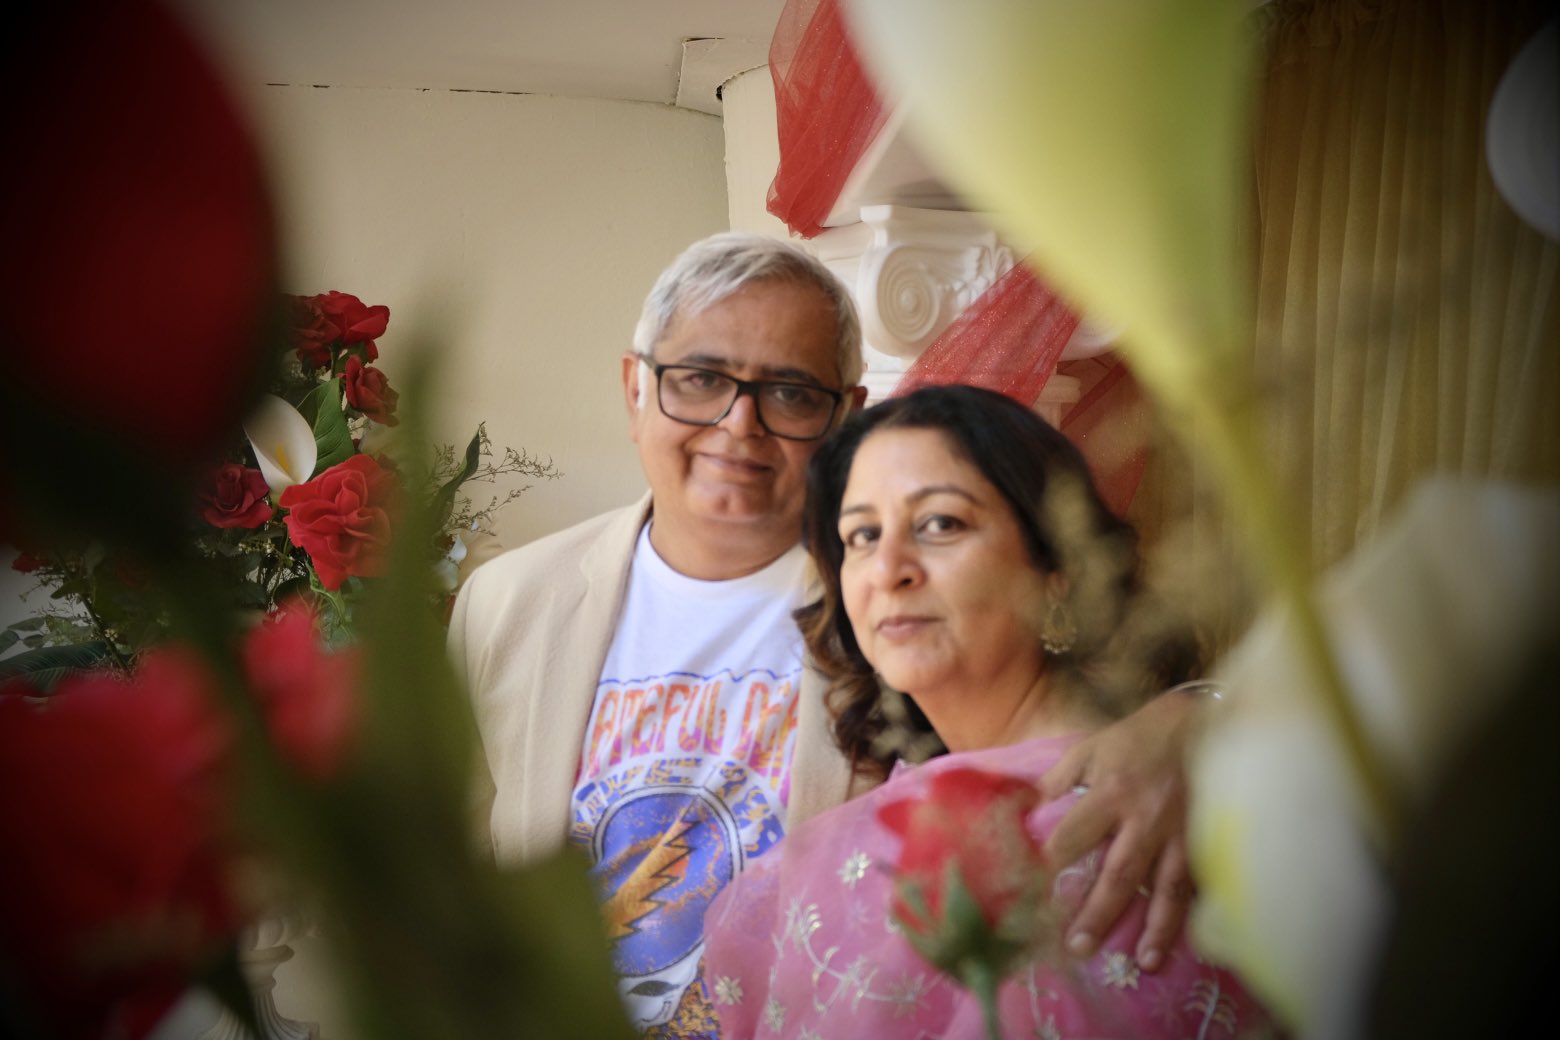 After living in live-in for 17 years, Hansal Mehta gave name to the relationship, at the age of 54, father of 4 children married Safina Hussain